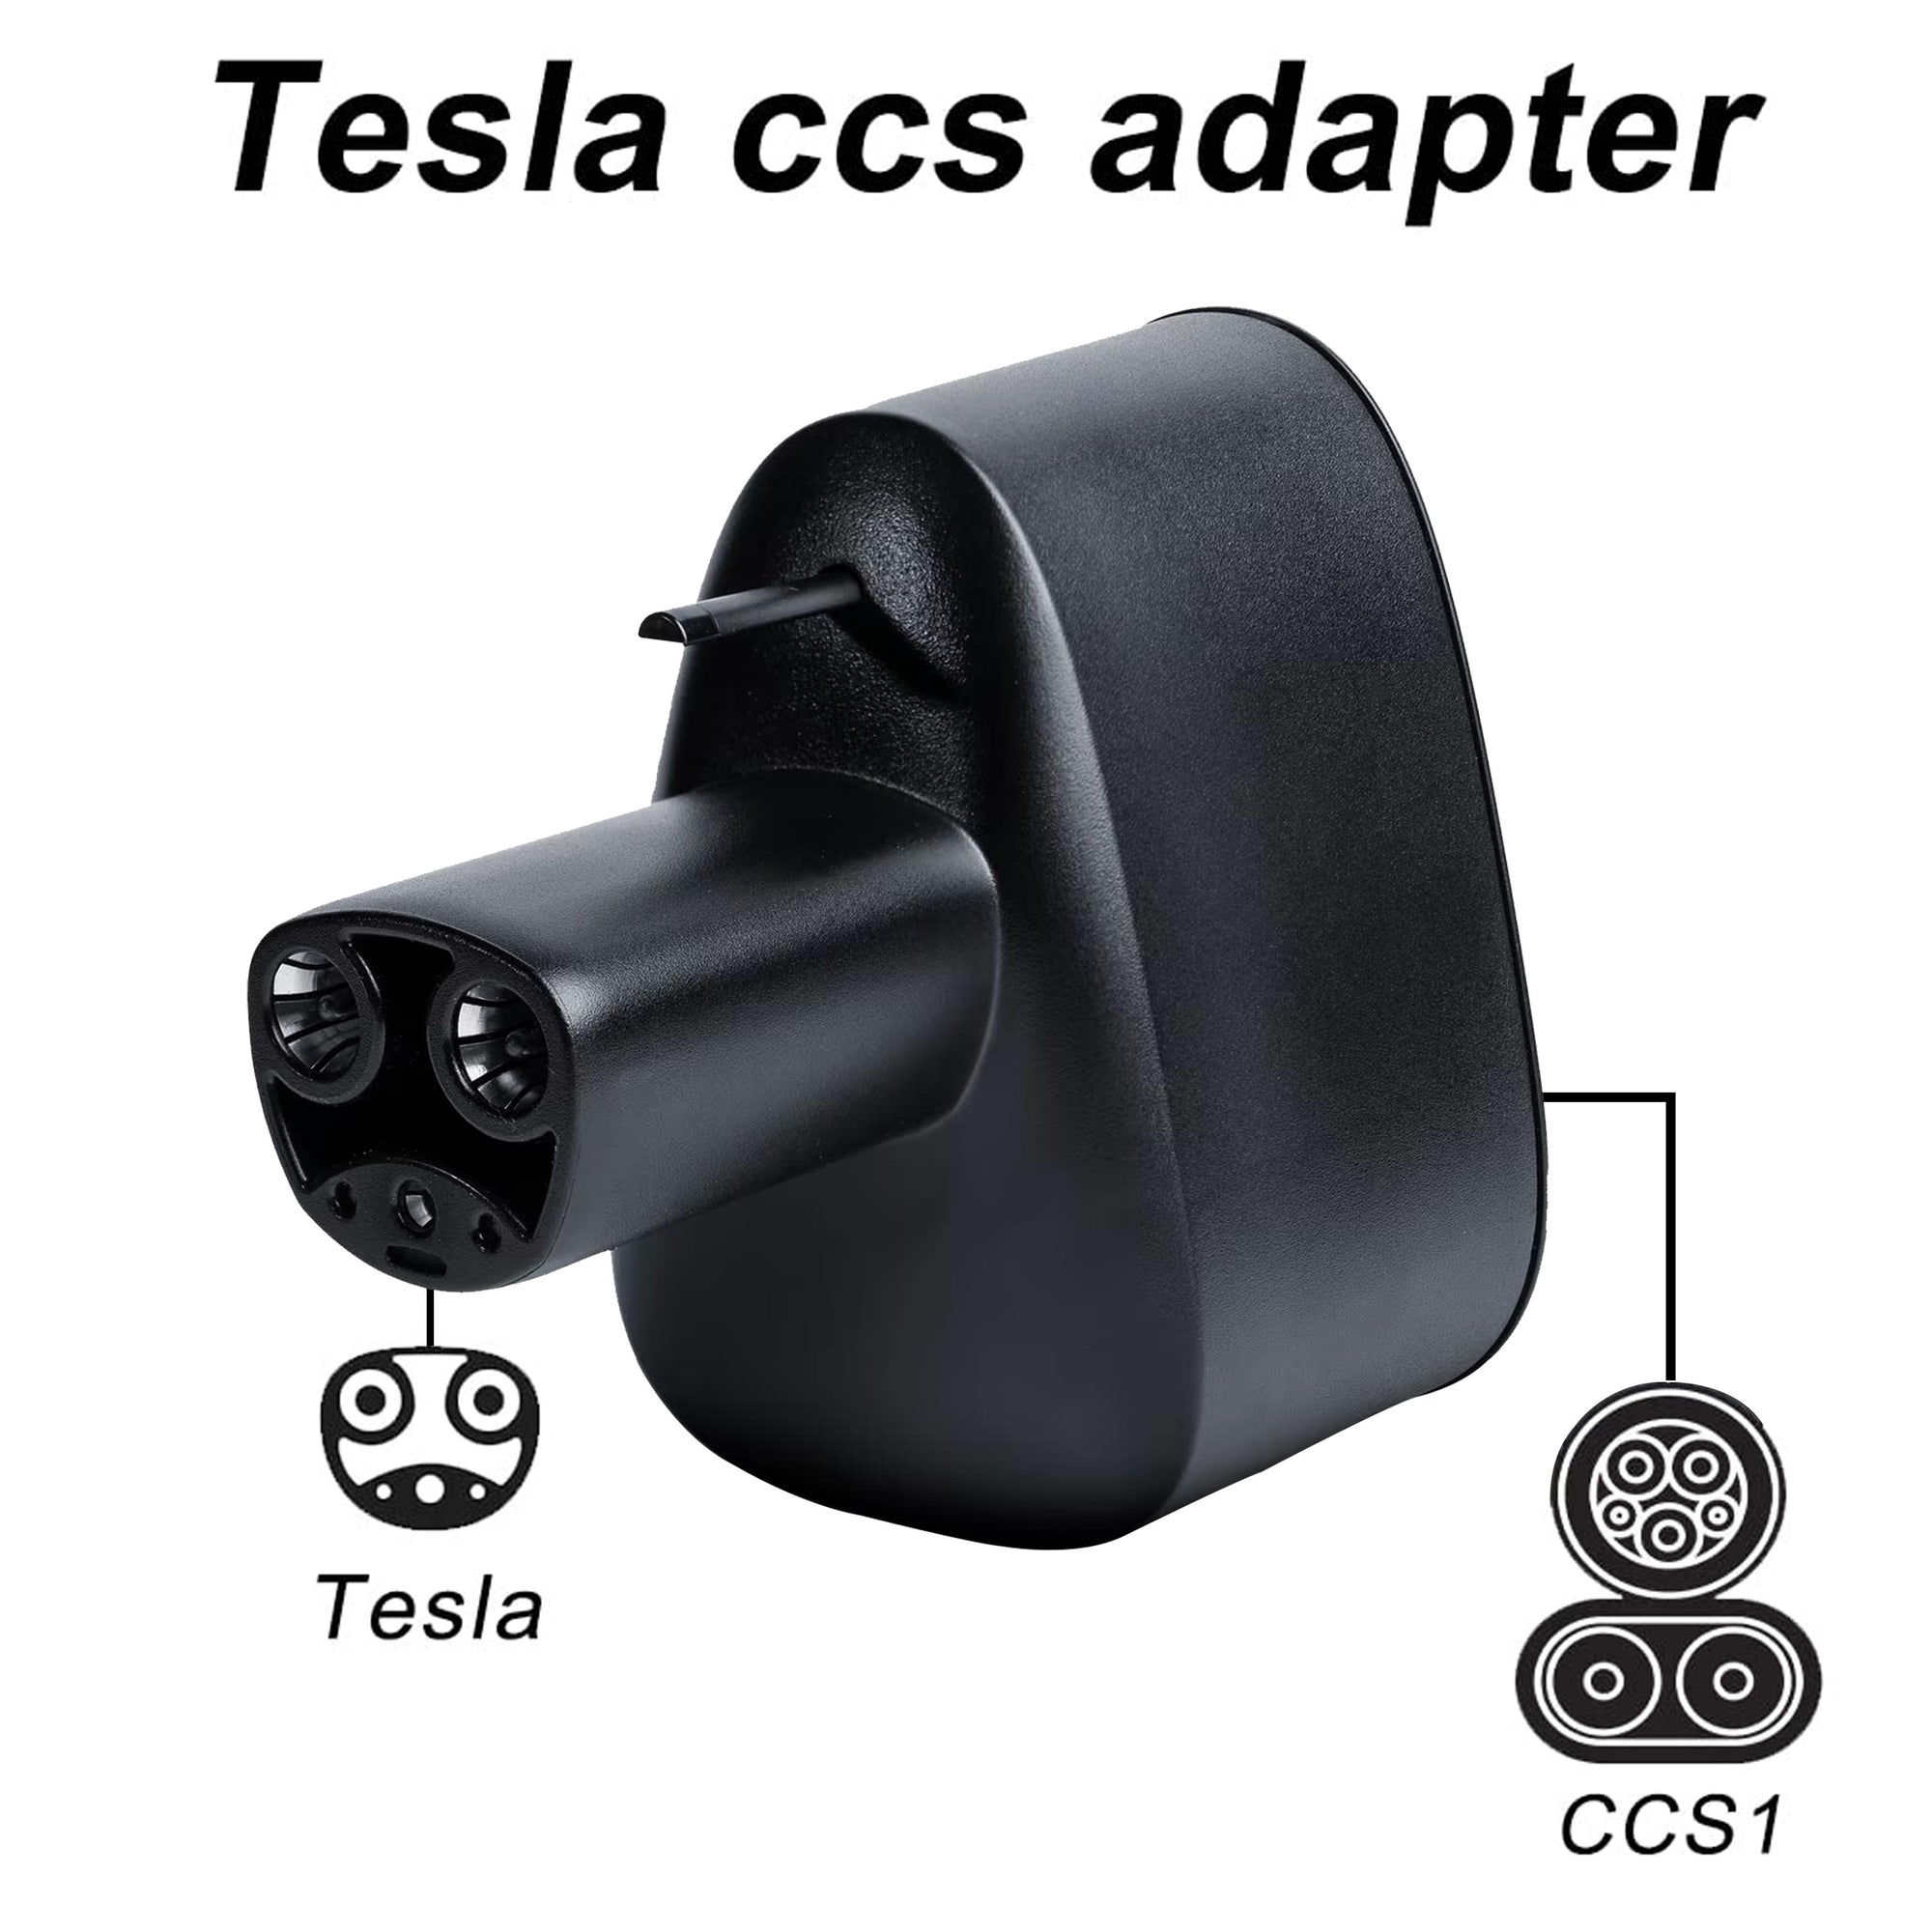 EV Tesla Electric Vehicles Adapter CHAdeMO for (IEC 62196 Type2) DC Charger  for Europe Models Tesla Model S, Model X, Not Suppor